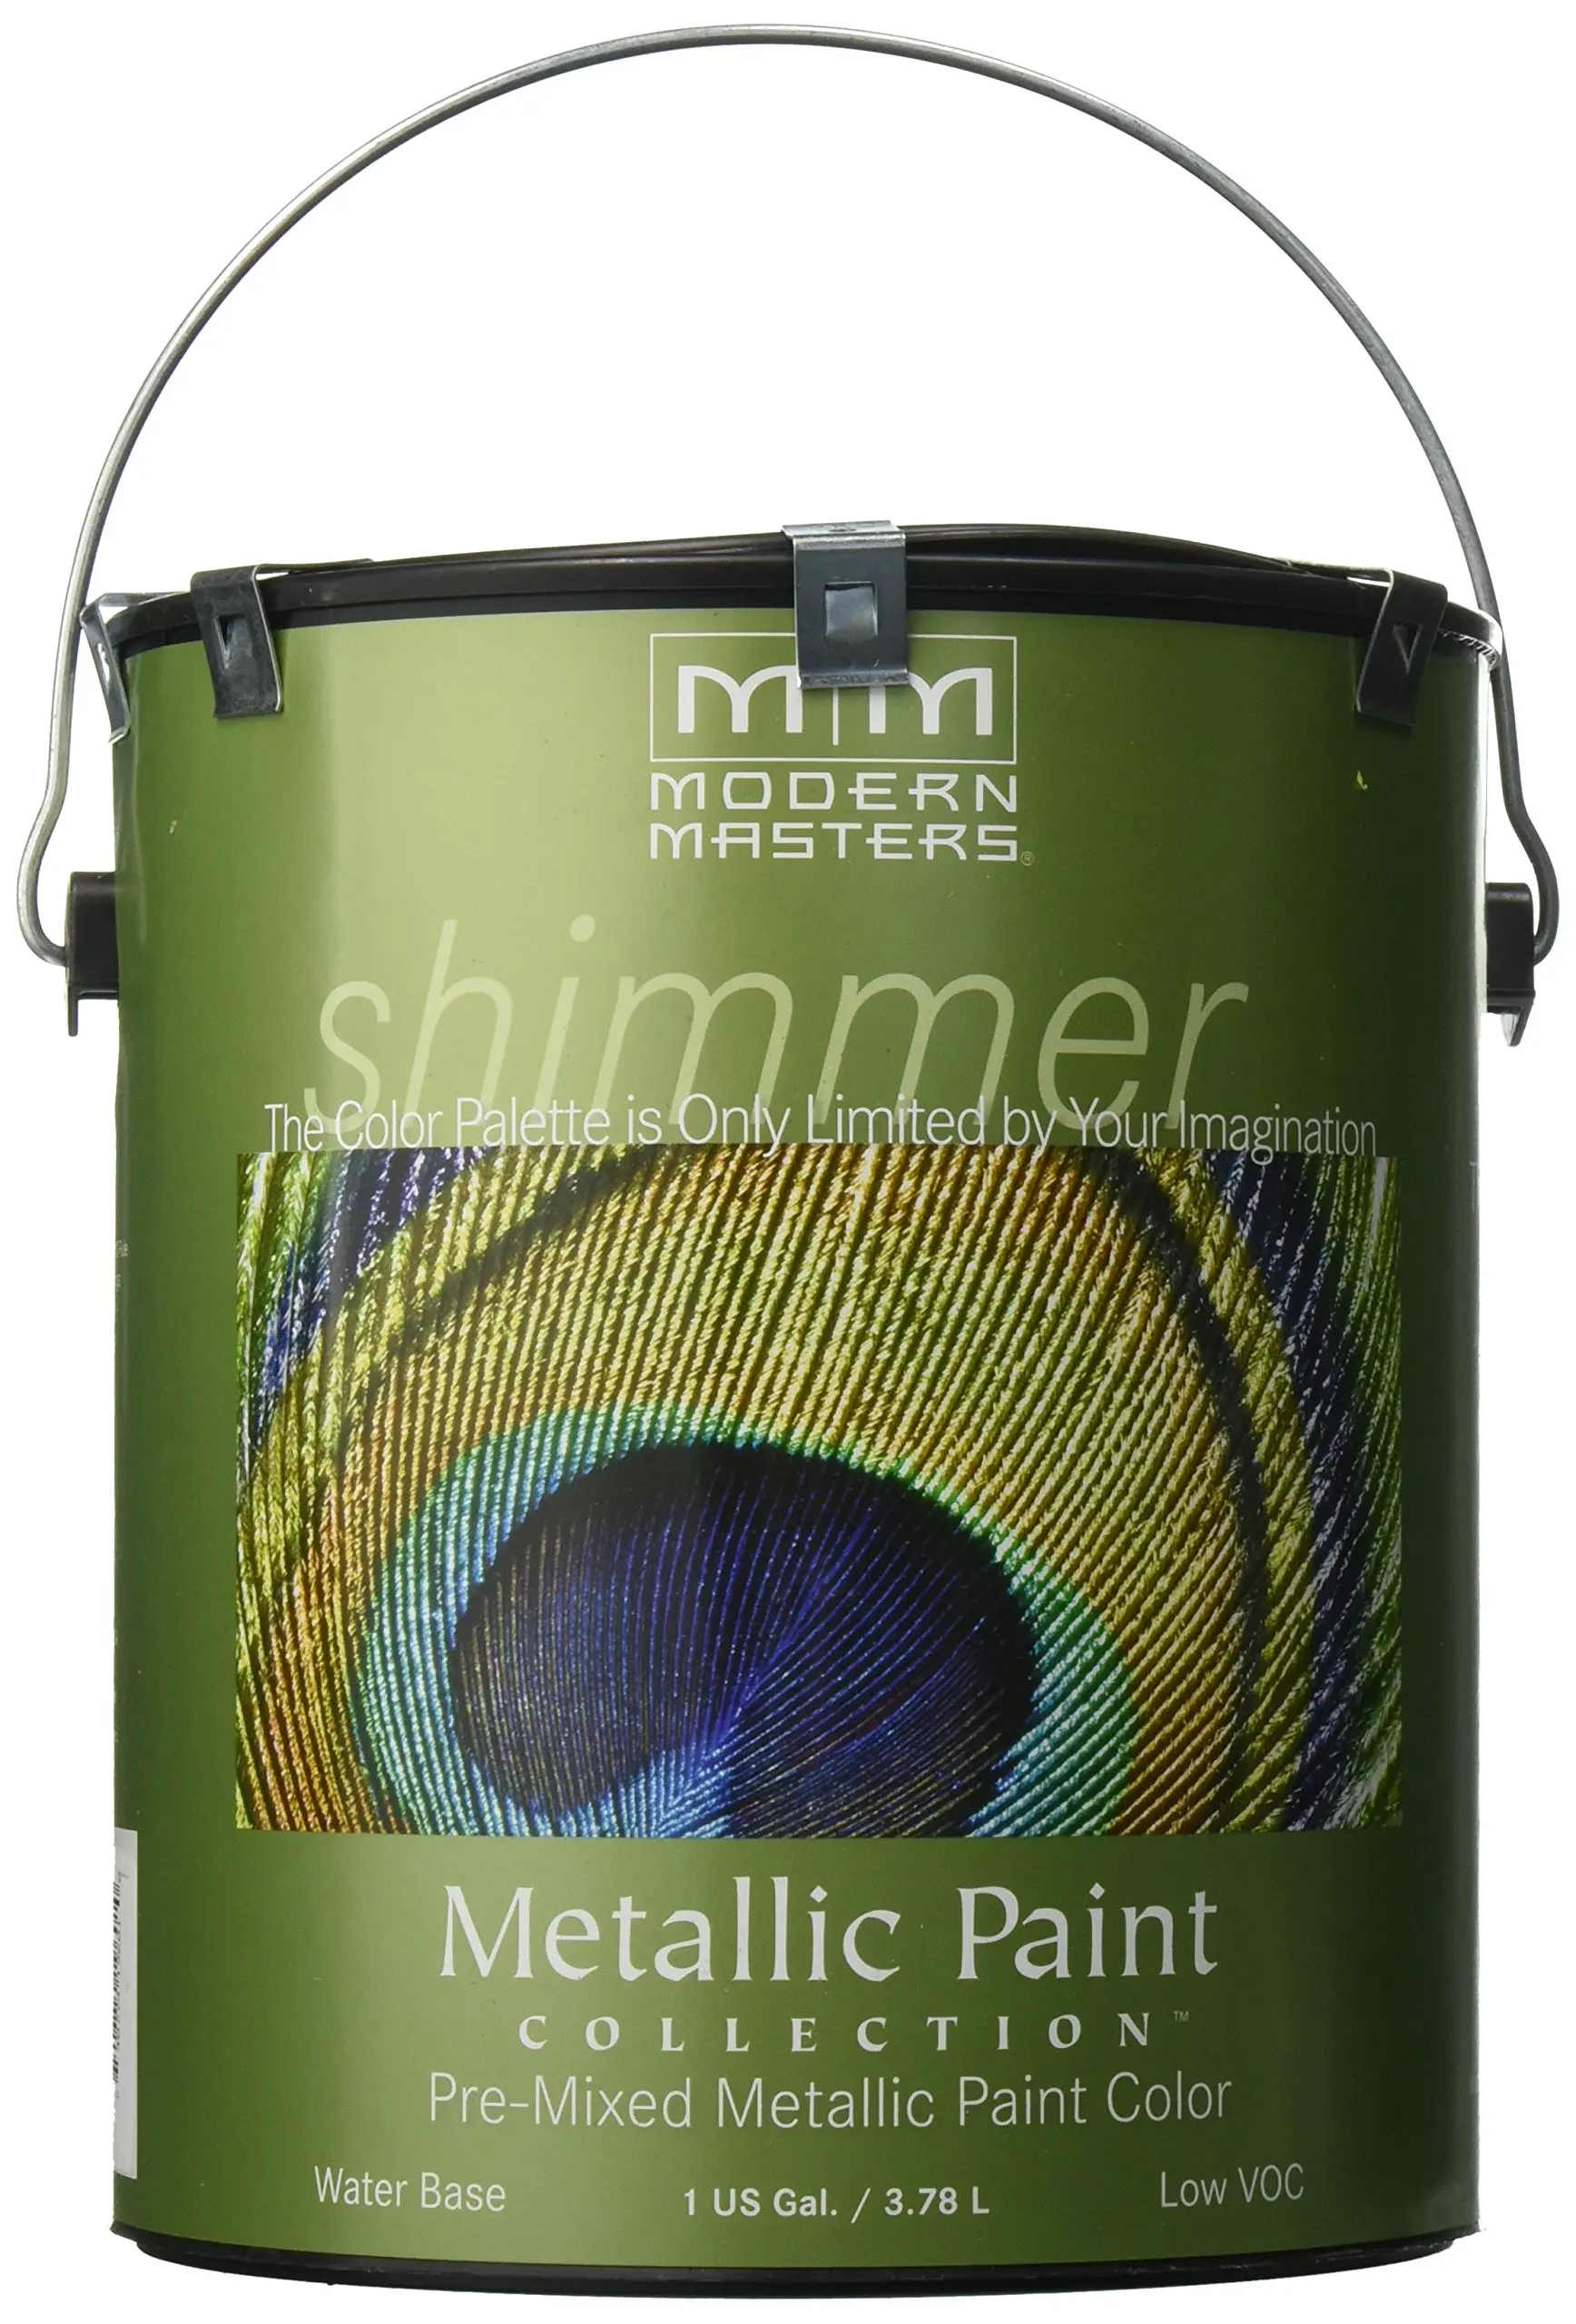 Modern Masters Metallic Paint Color Chart